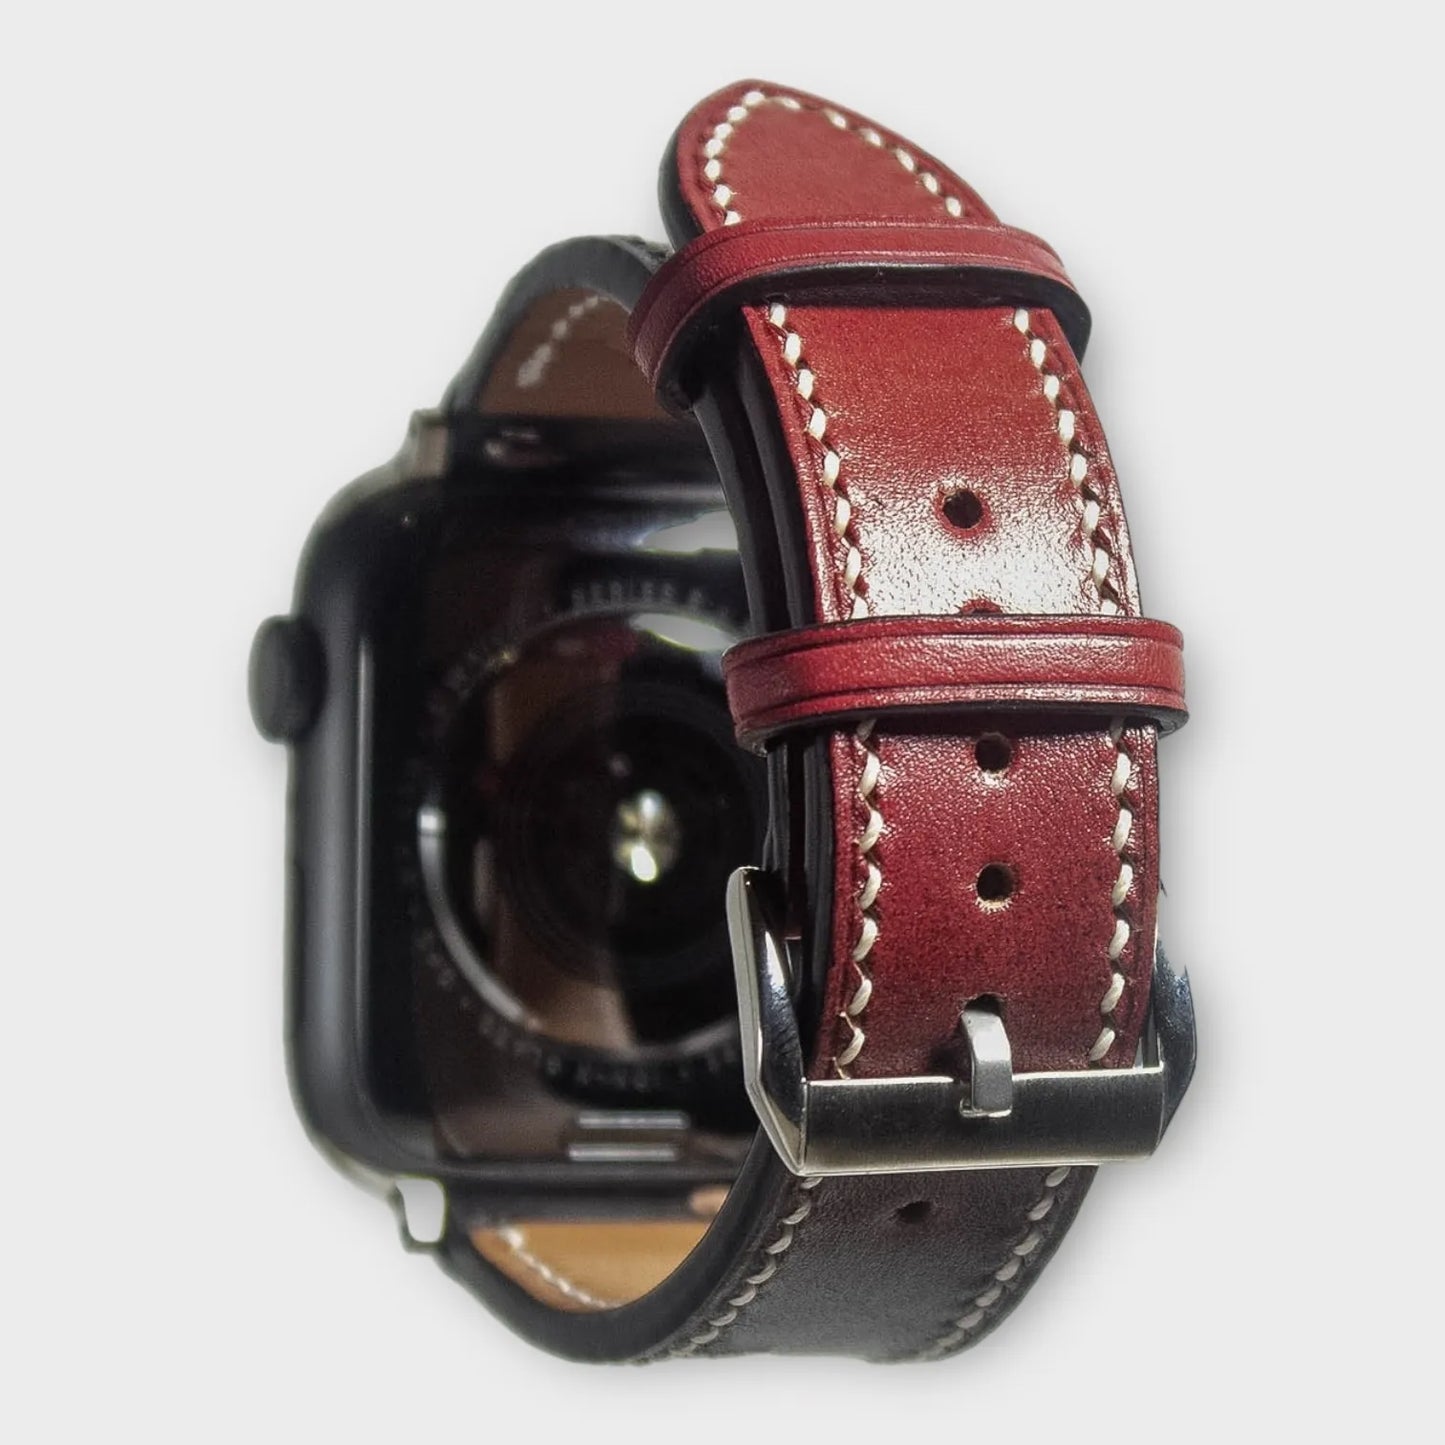 Apple watch bands featuring a smooth transition from red to black in Veg leather, stylish and eco-conscious.